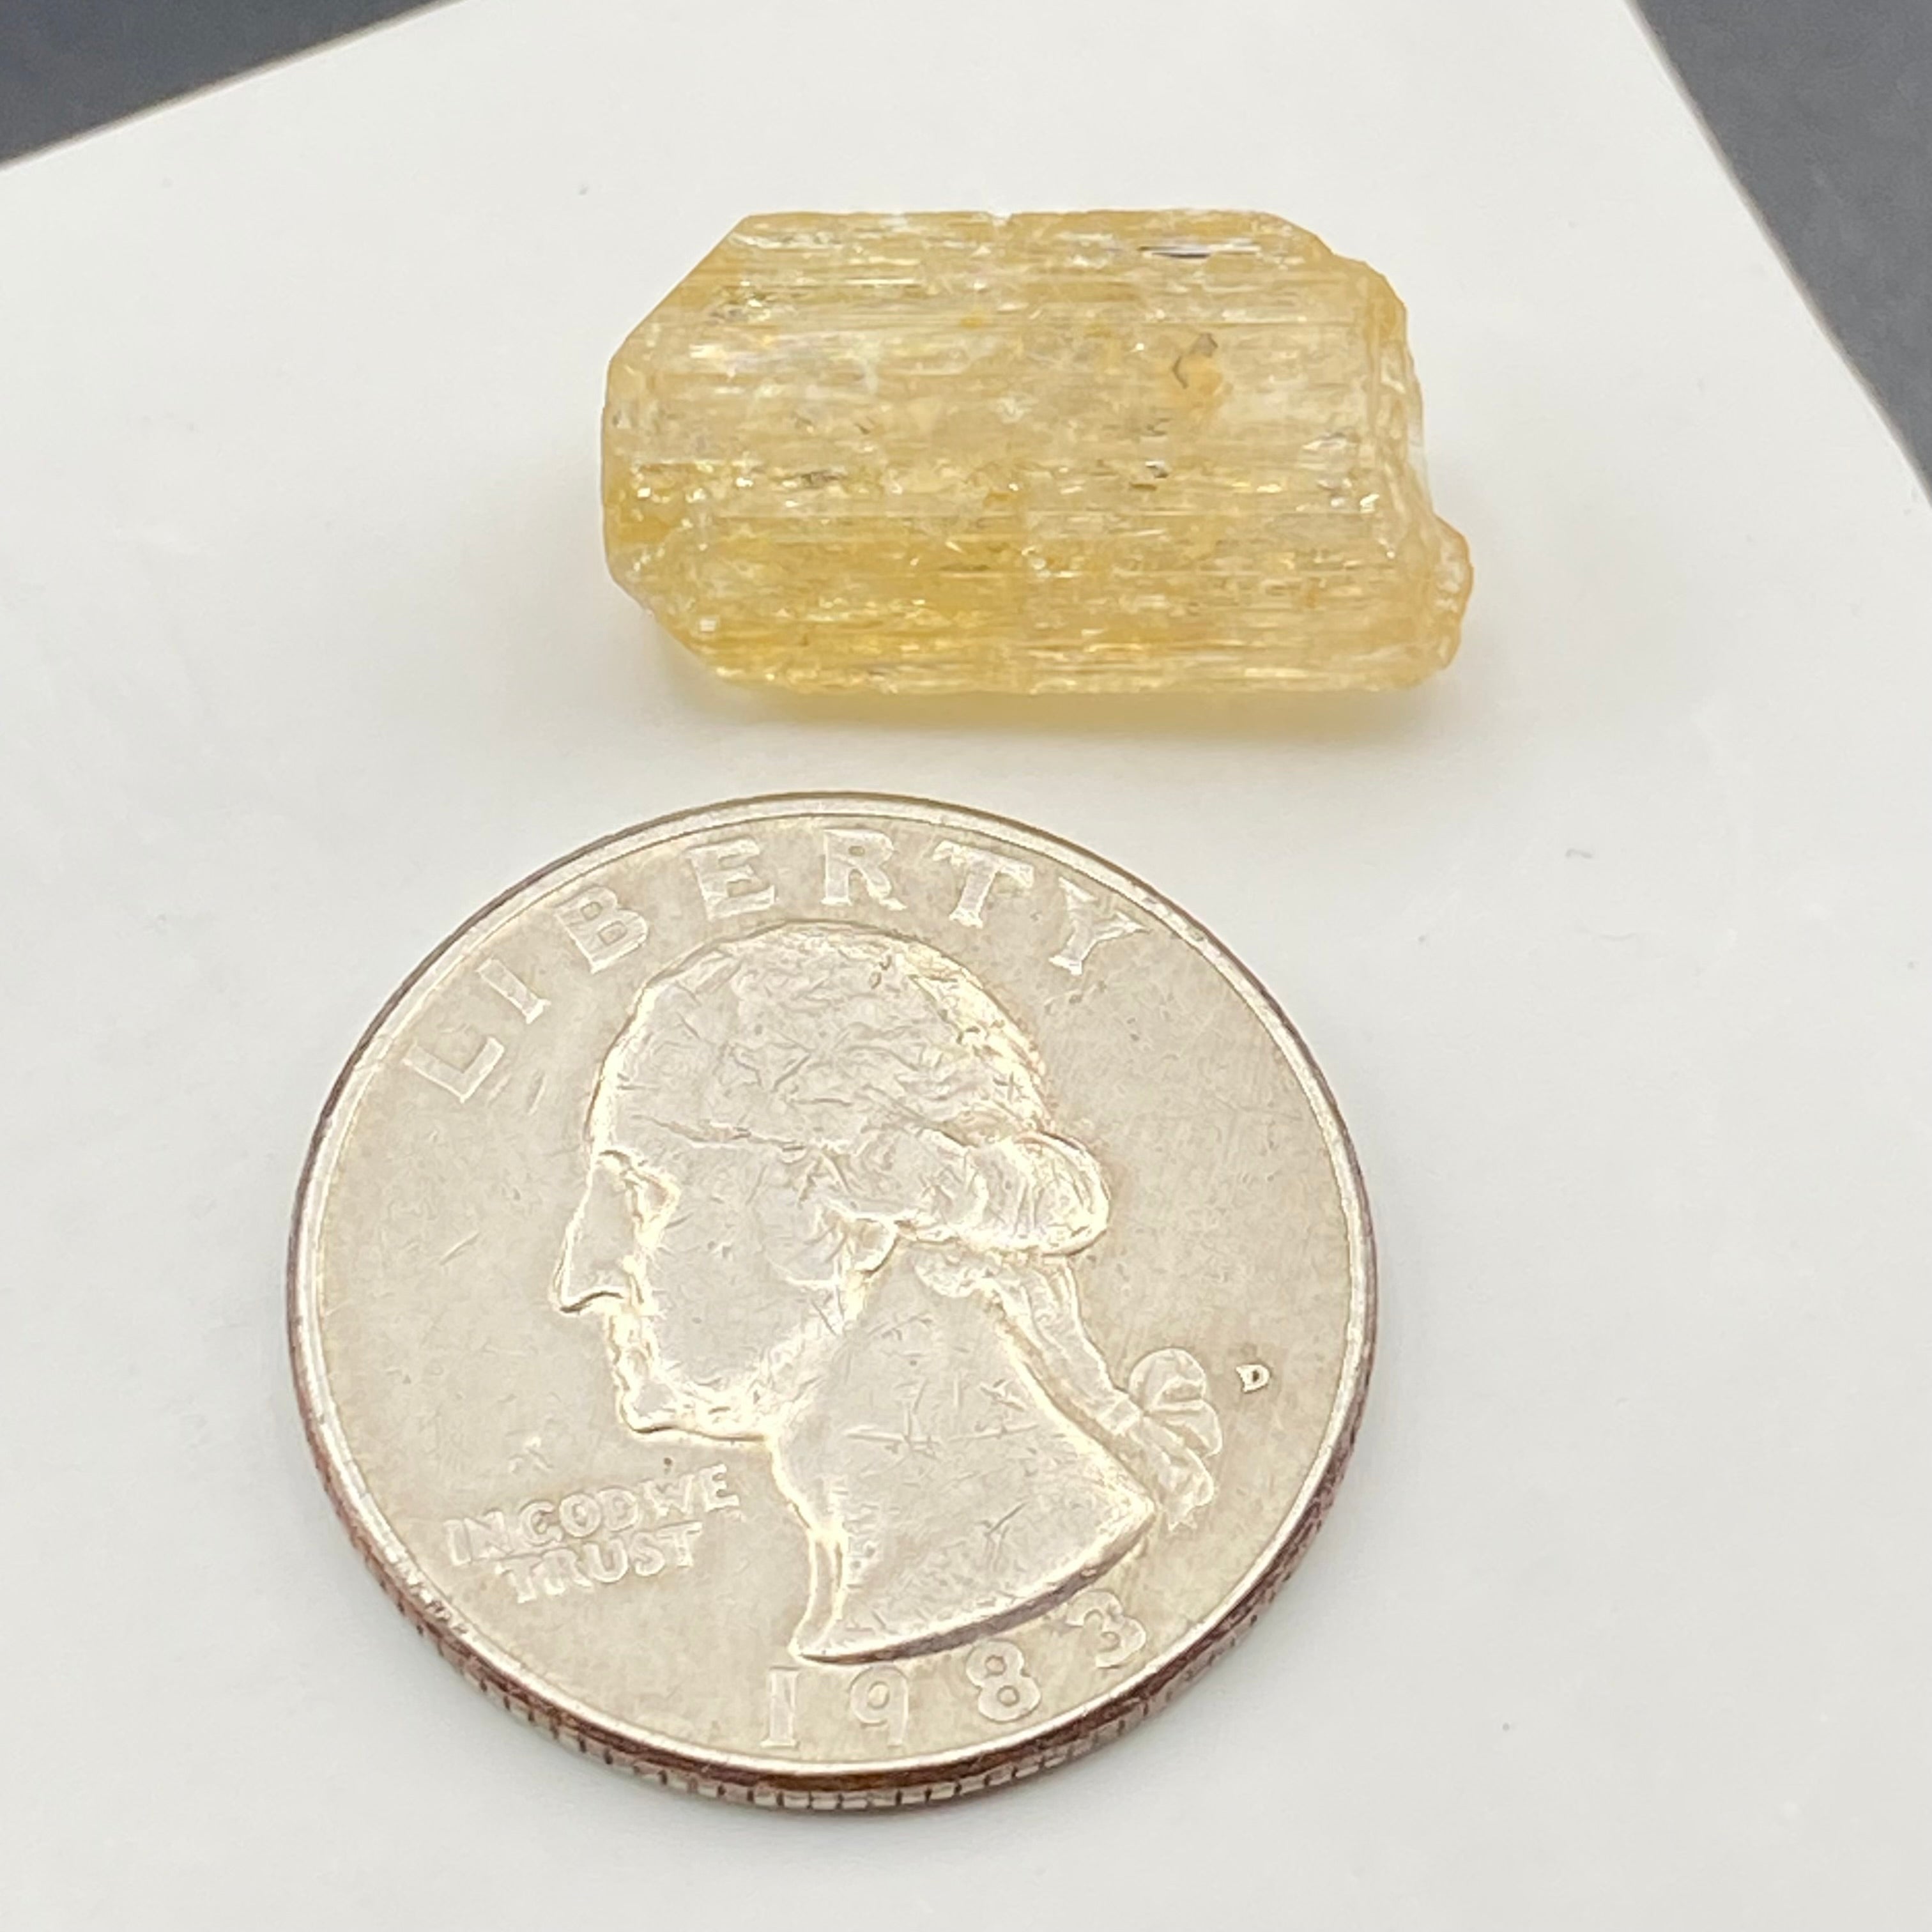 Imperial Topaz Natural Full Terminated Crystal - 150